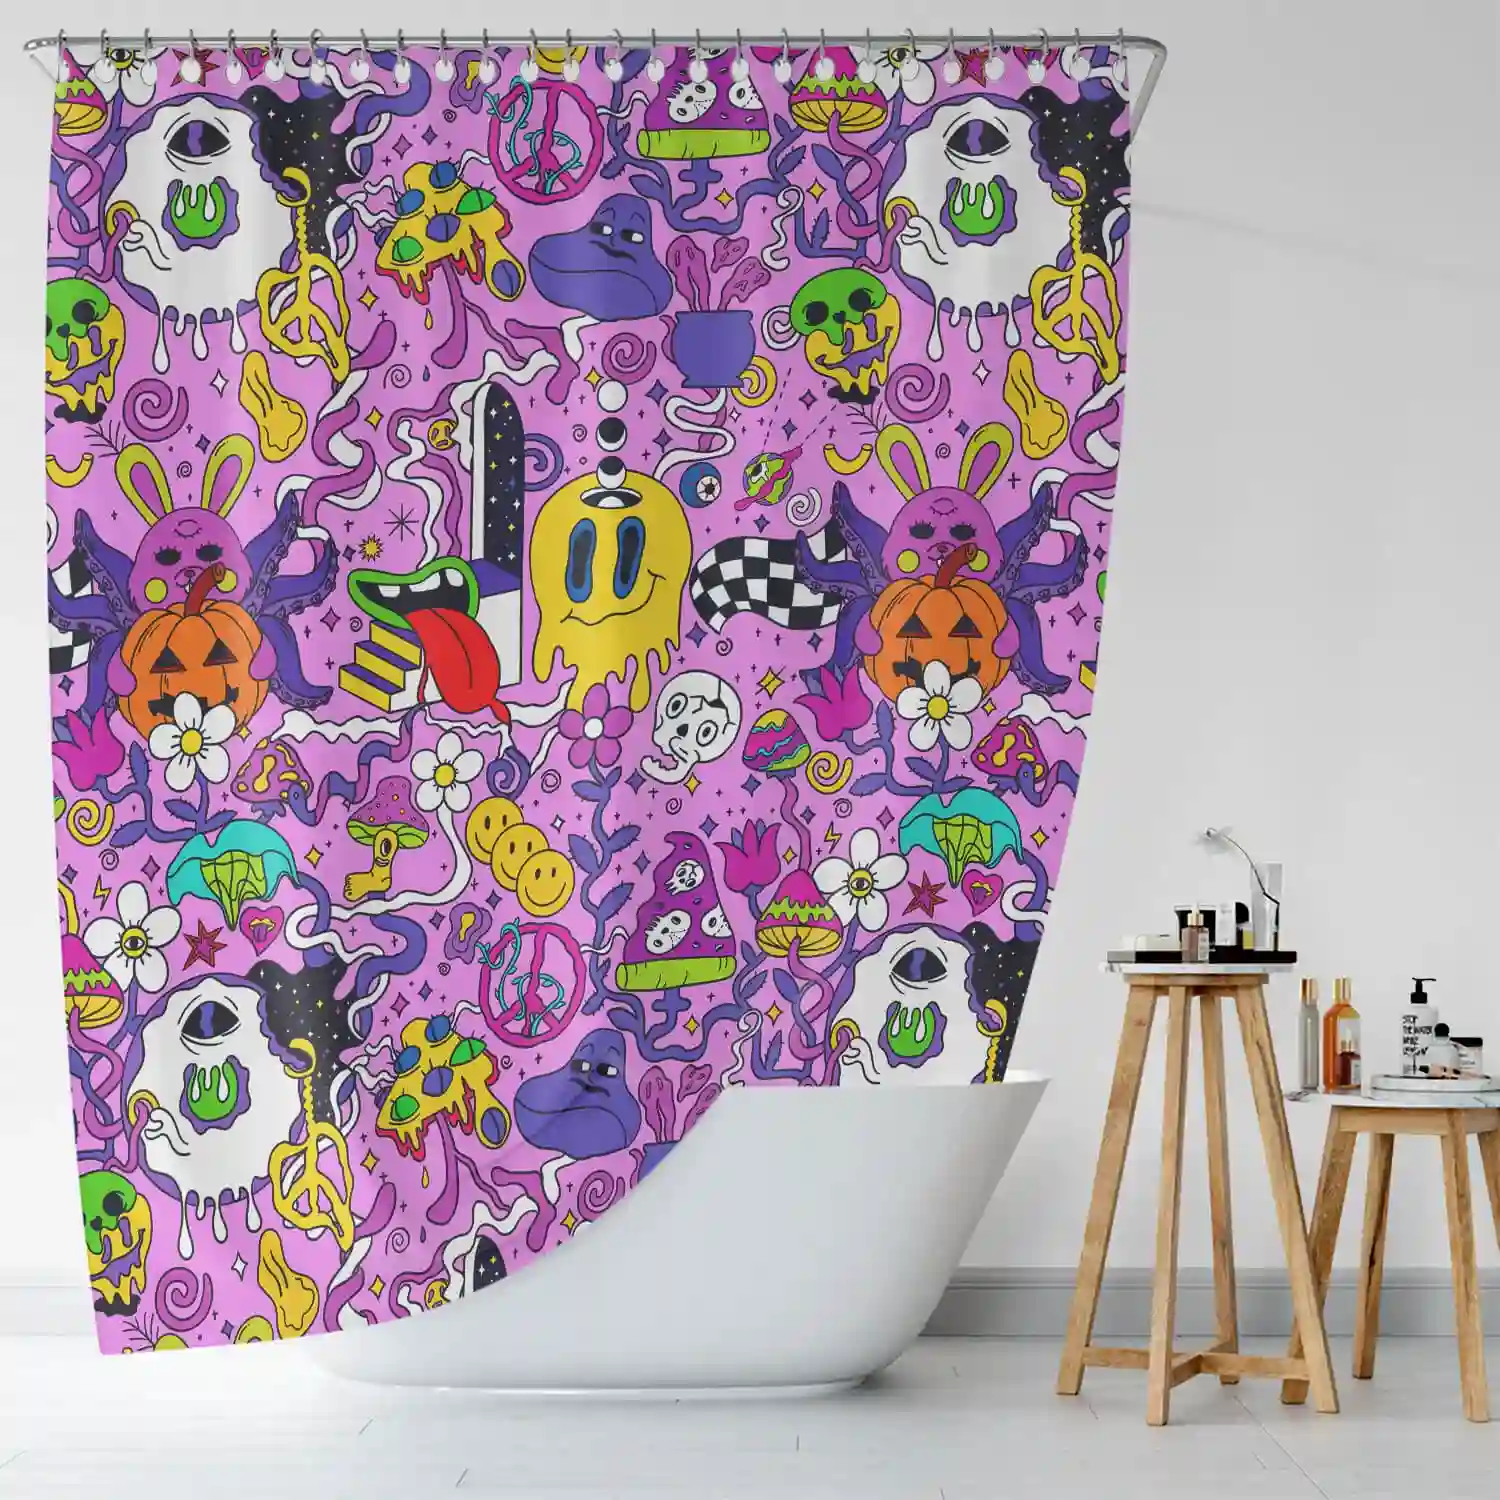 Unique Shower Curtains for Small Bathrooms: A purple shower curtain with a variety of cartoon characters on it.